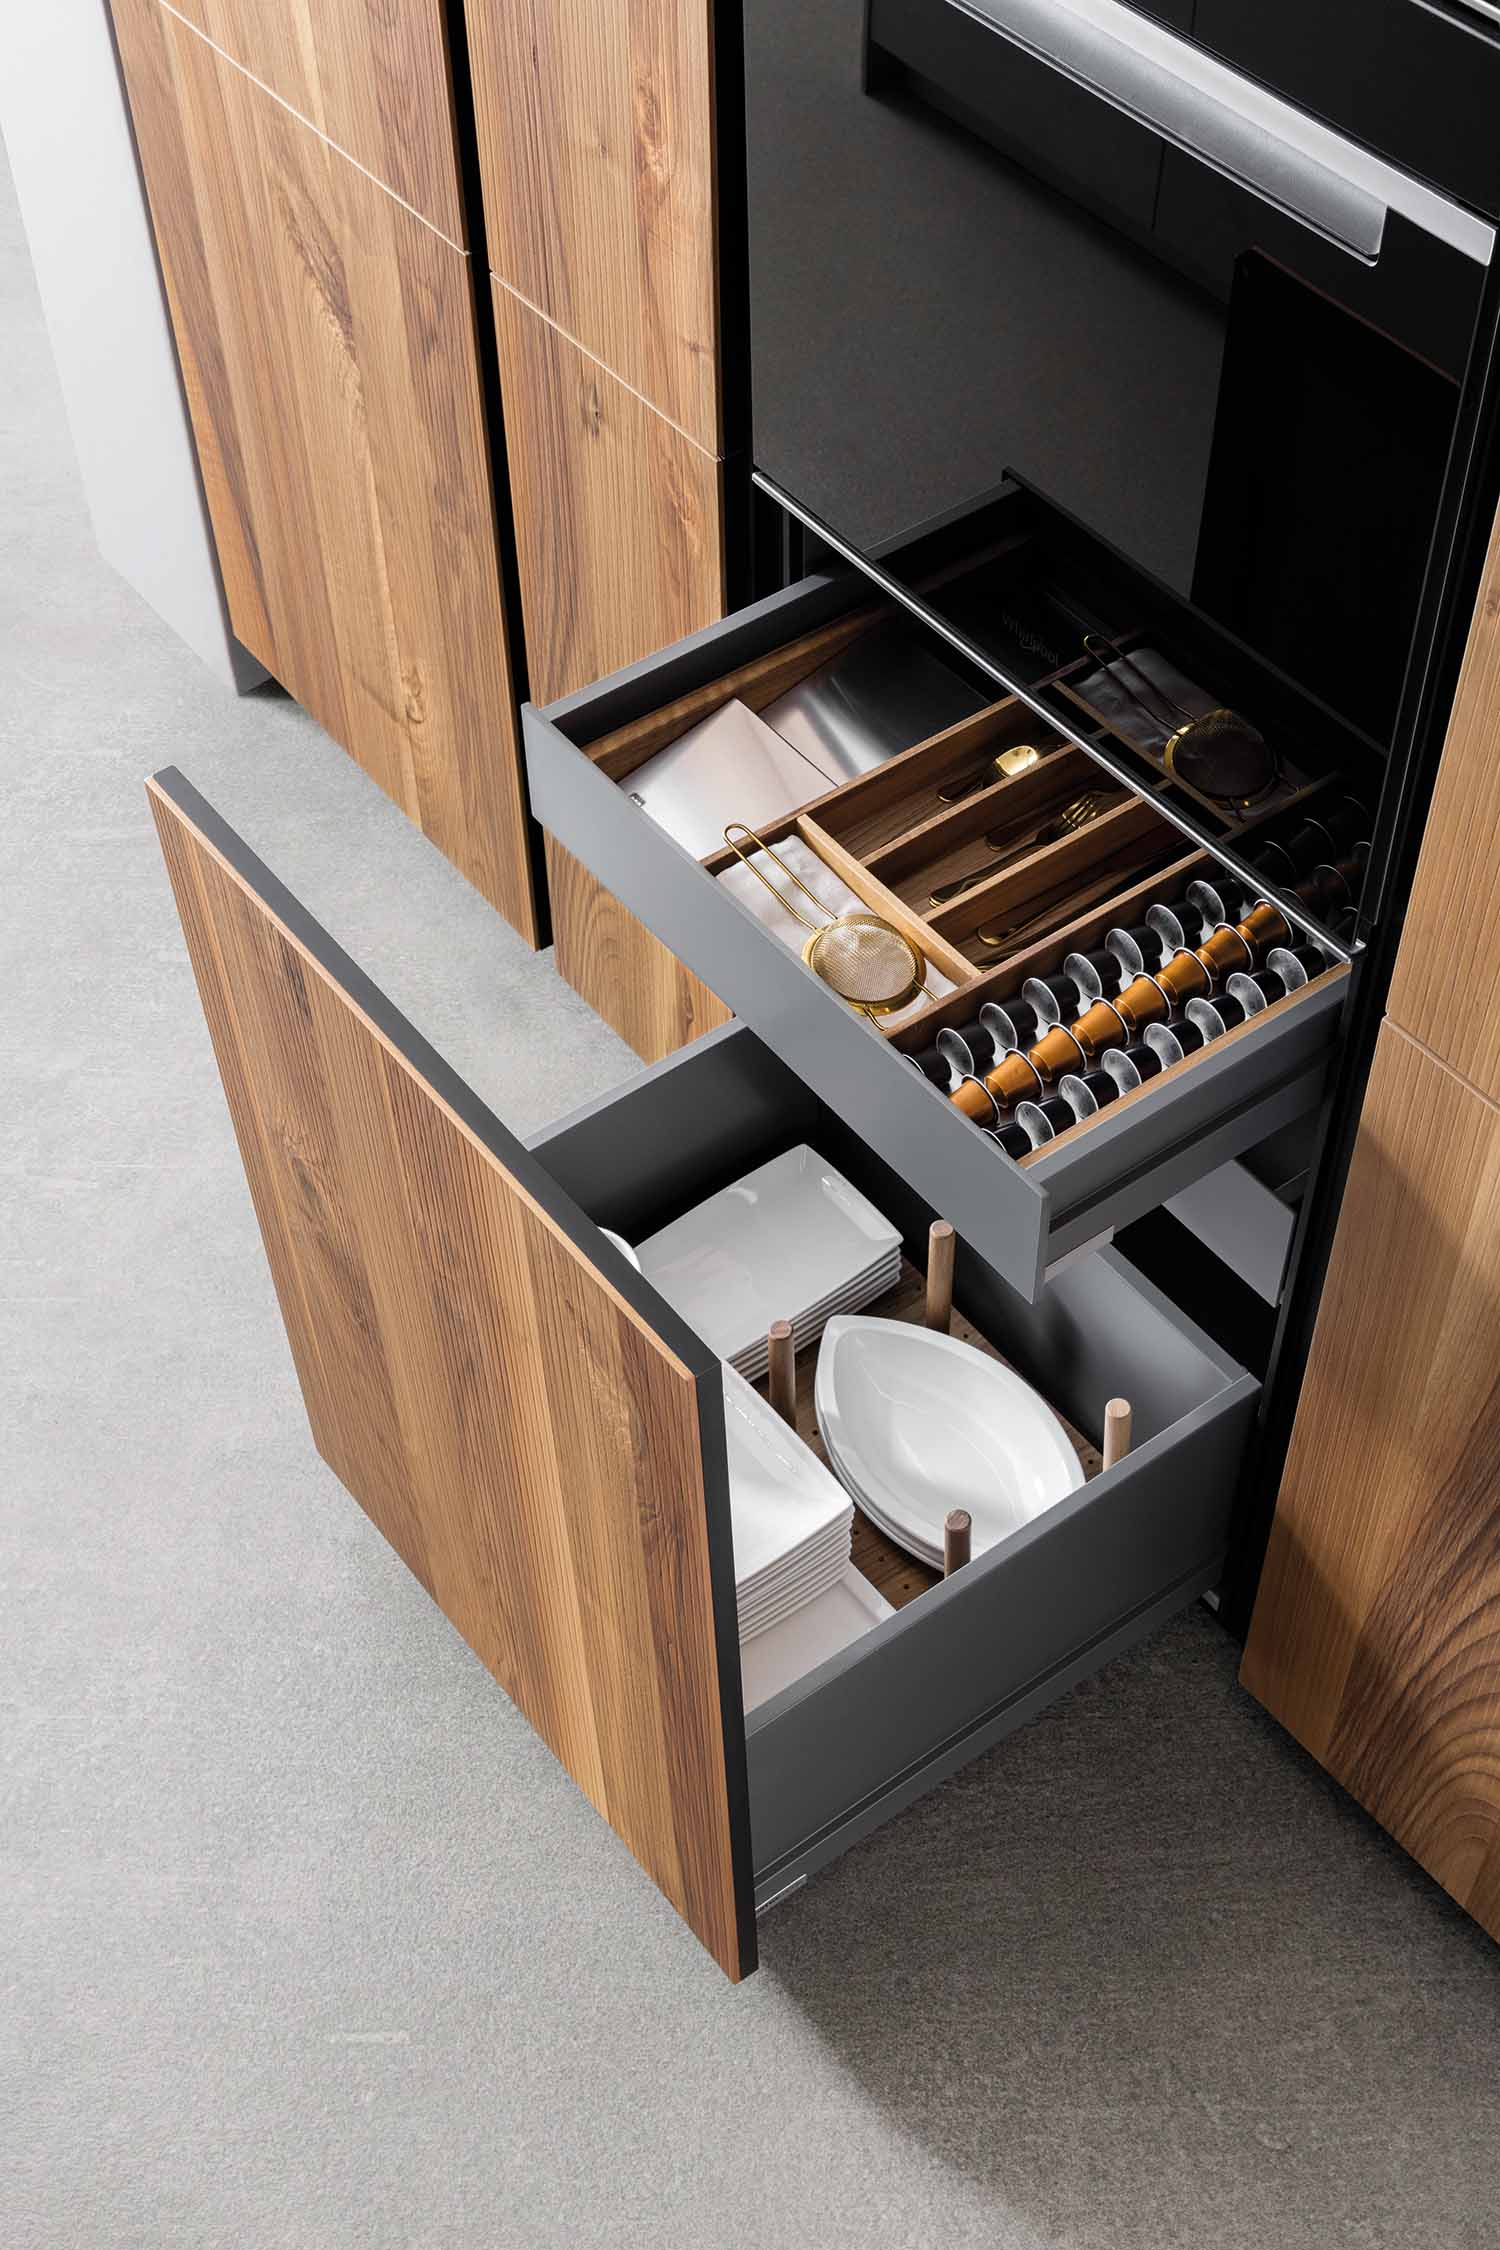 Kitchen deep drawer with internal drawer boxes and organisers.